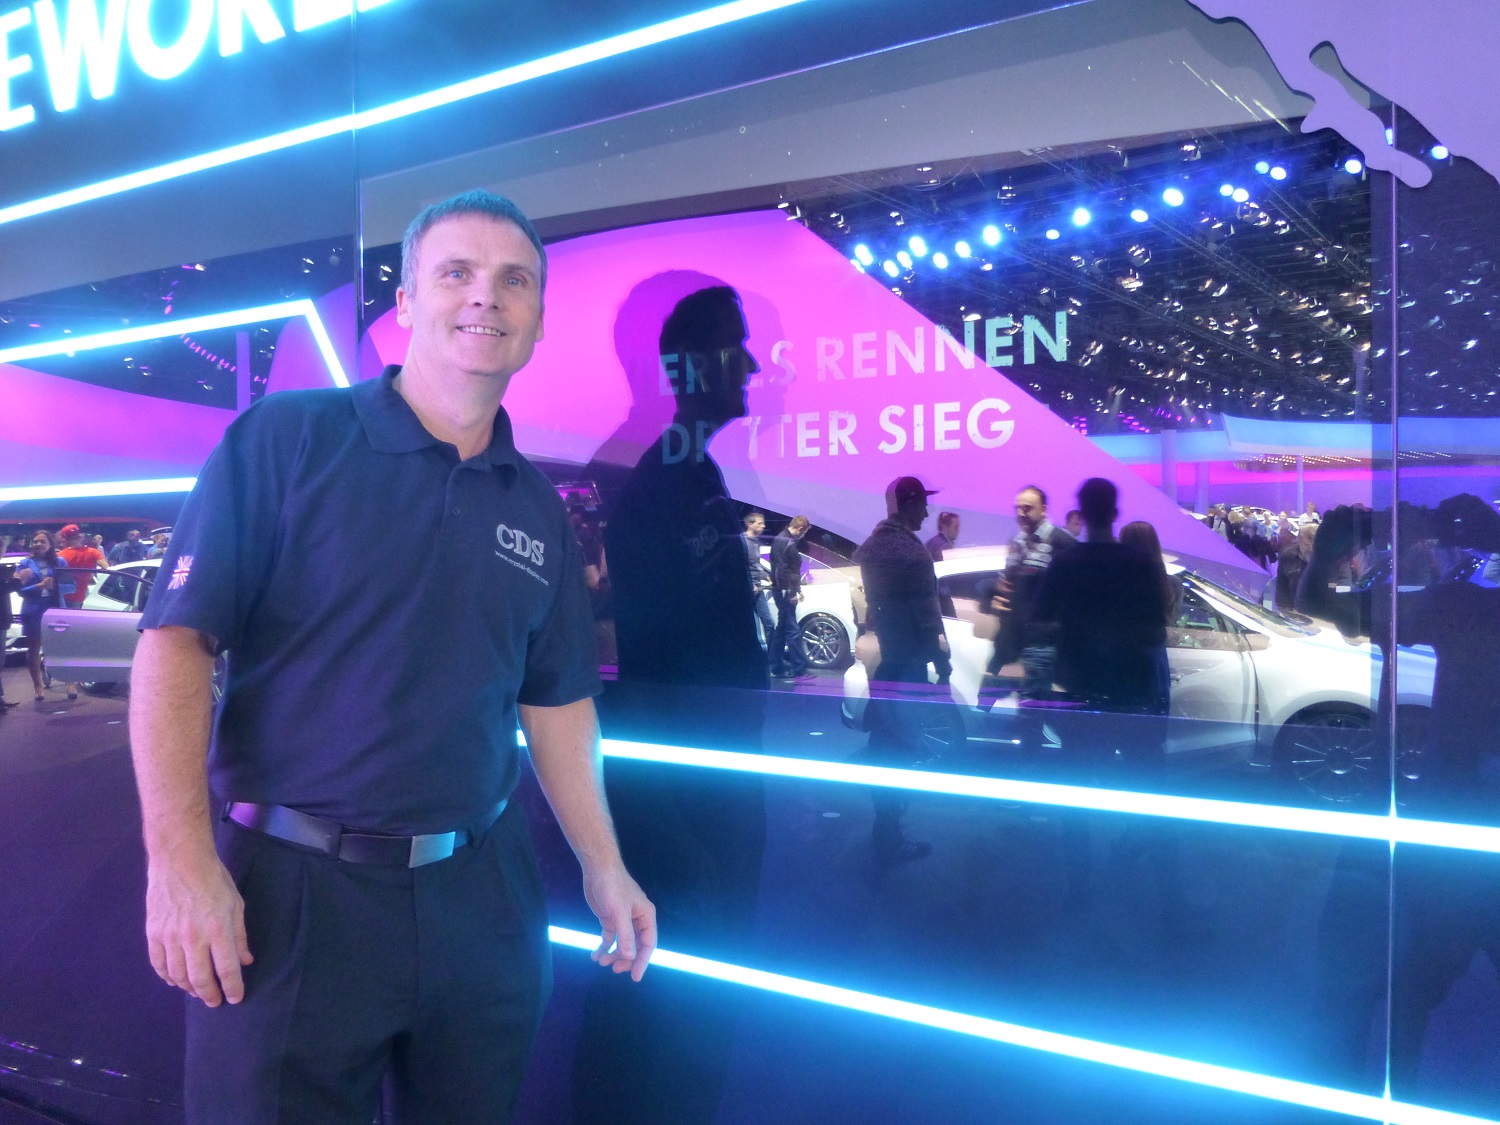 Volkswagen WOWS Visitors with Translucent Displays